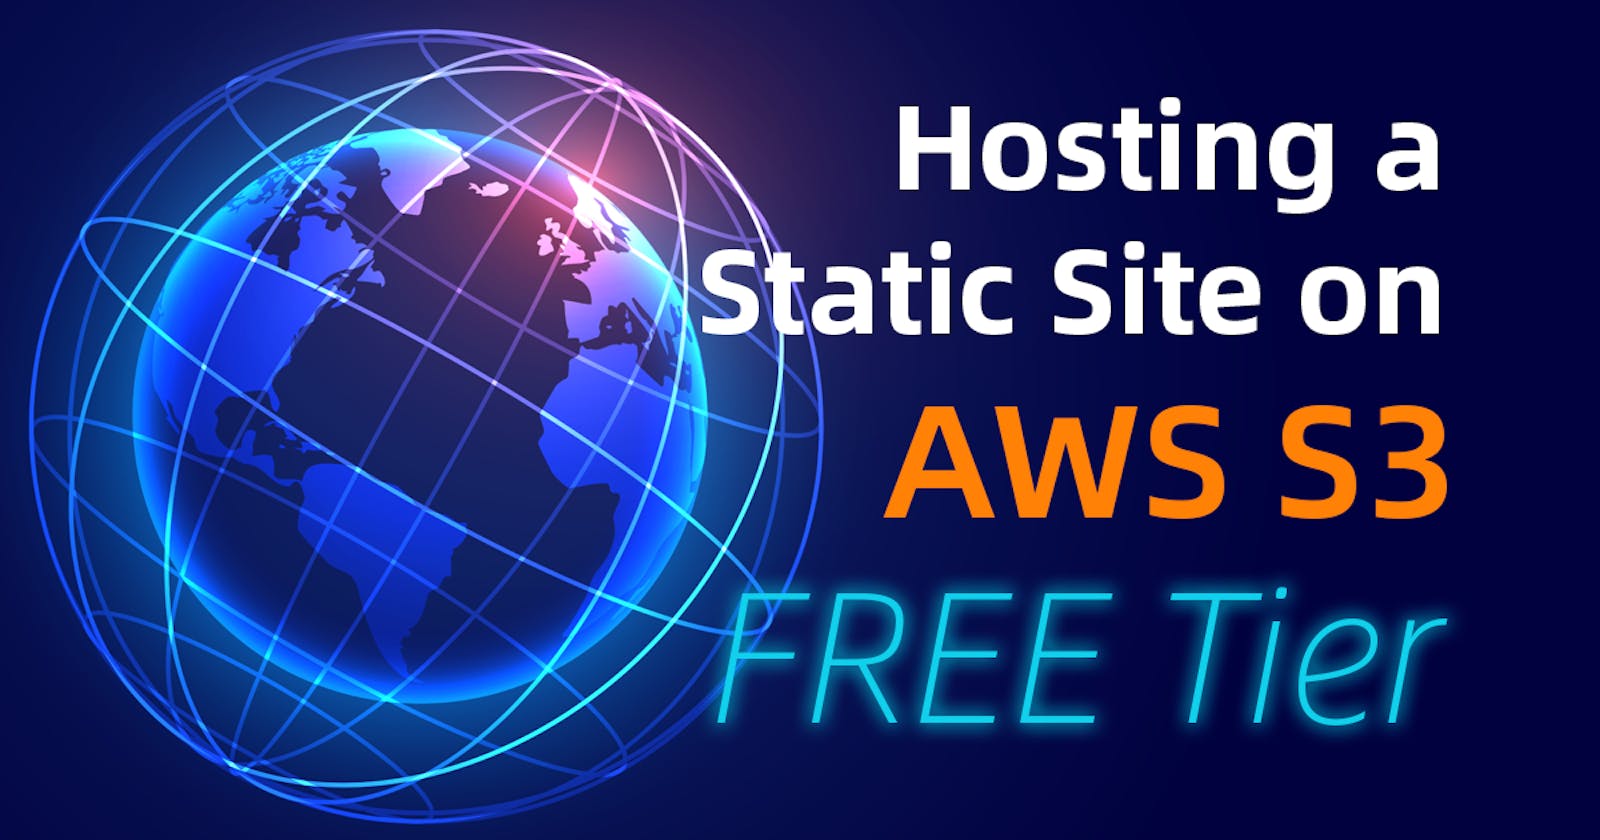 Hosting a Static Site On AWS S3 FREE Tier